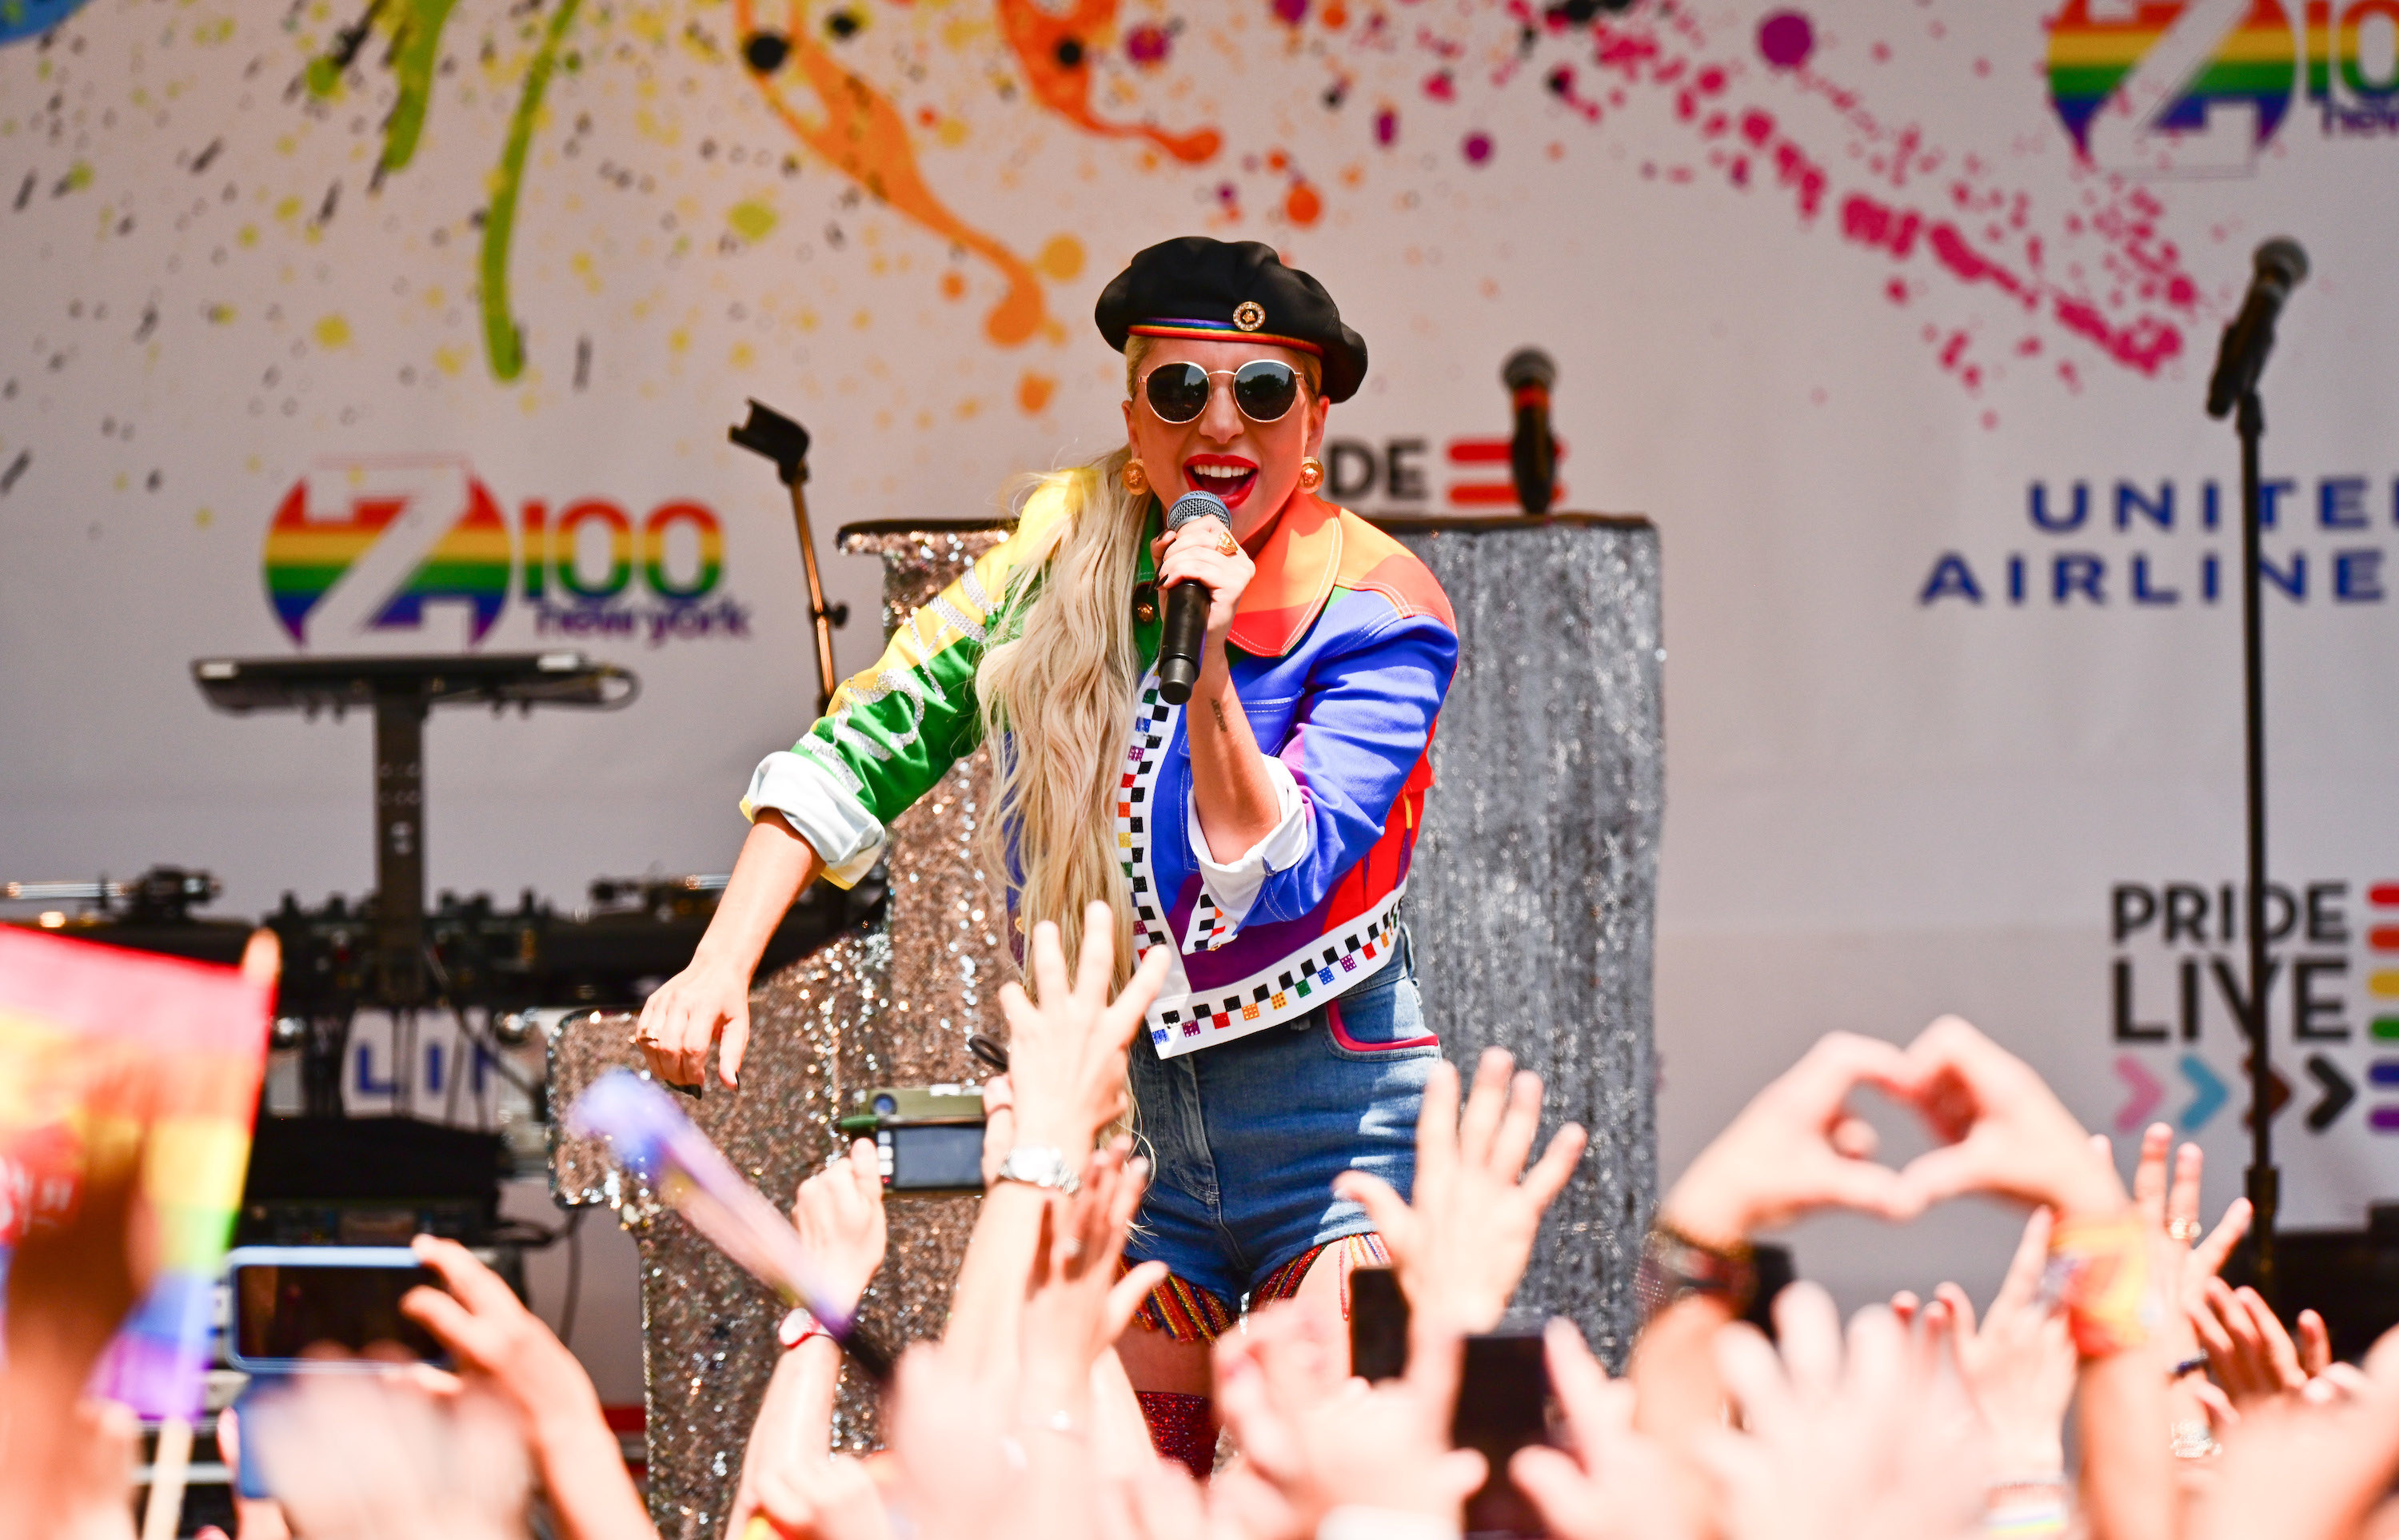 Lady Gaga at Pride Live&#x27;s 2019 Stonewall Day in New York City wearing a jacket and beret